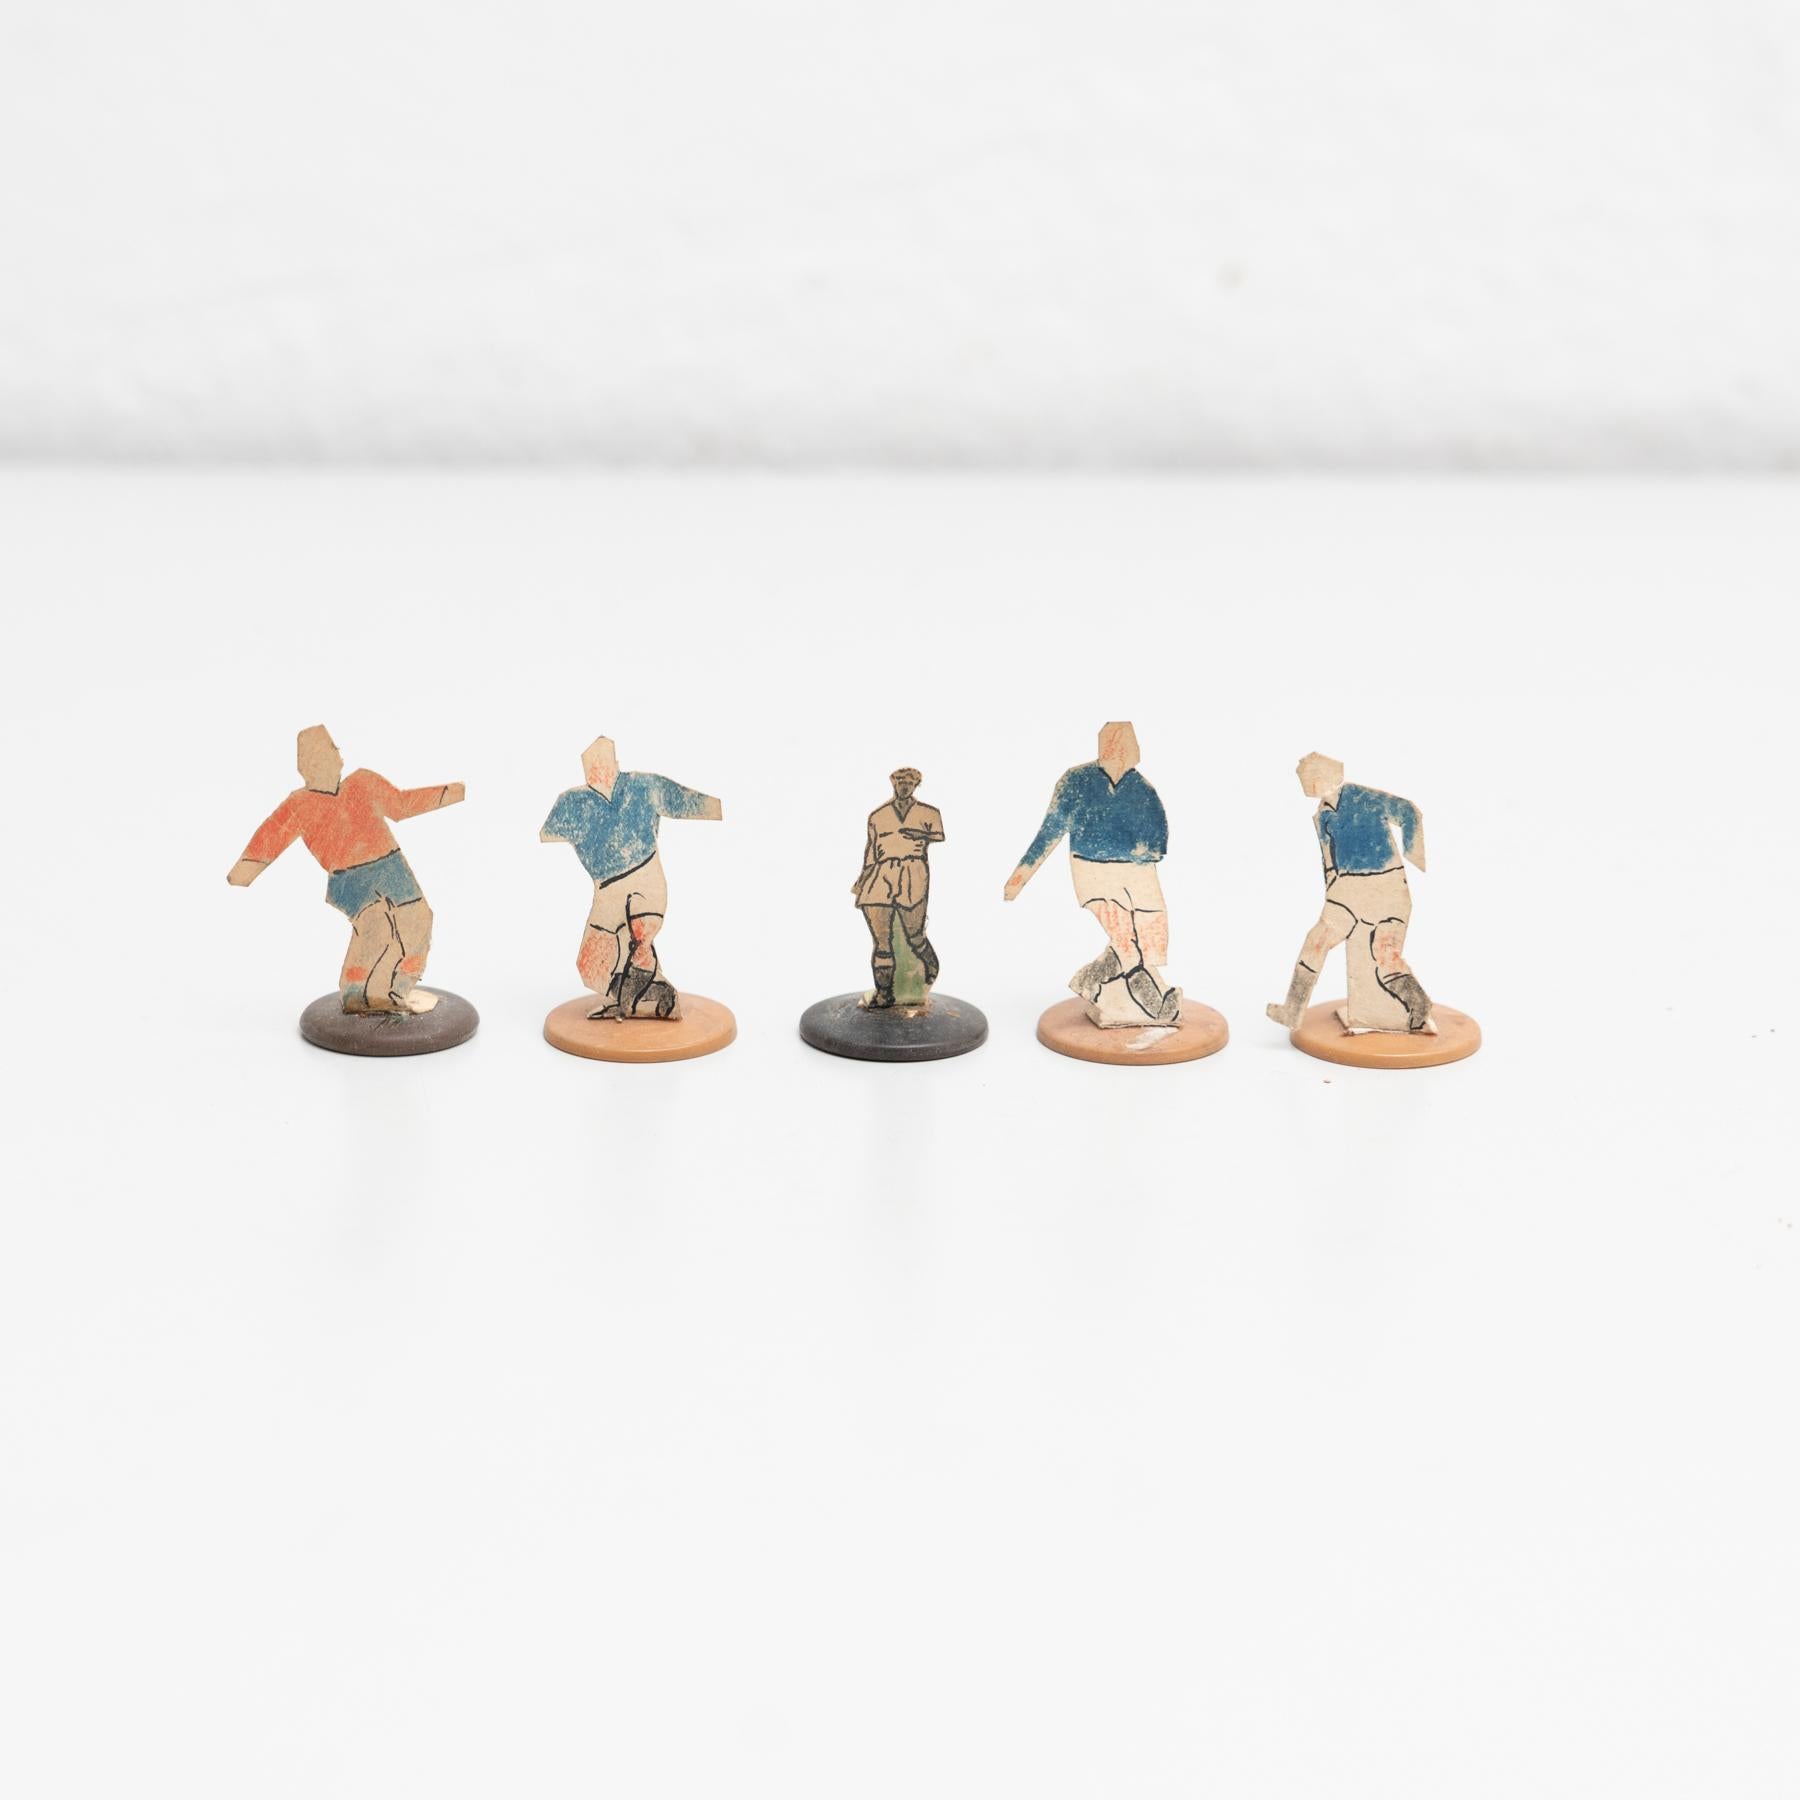 Set of five table button soccer game players. Traditional figures used to play this classic button Spanish game. 

The players are build buy attaching a printed photography or drawing of an actual football soccer player to a clothing button.